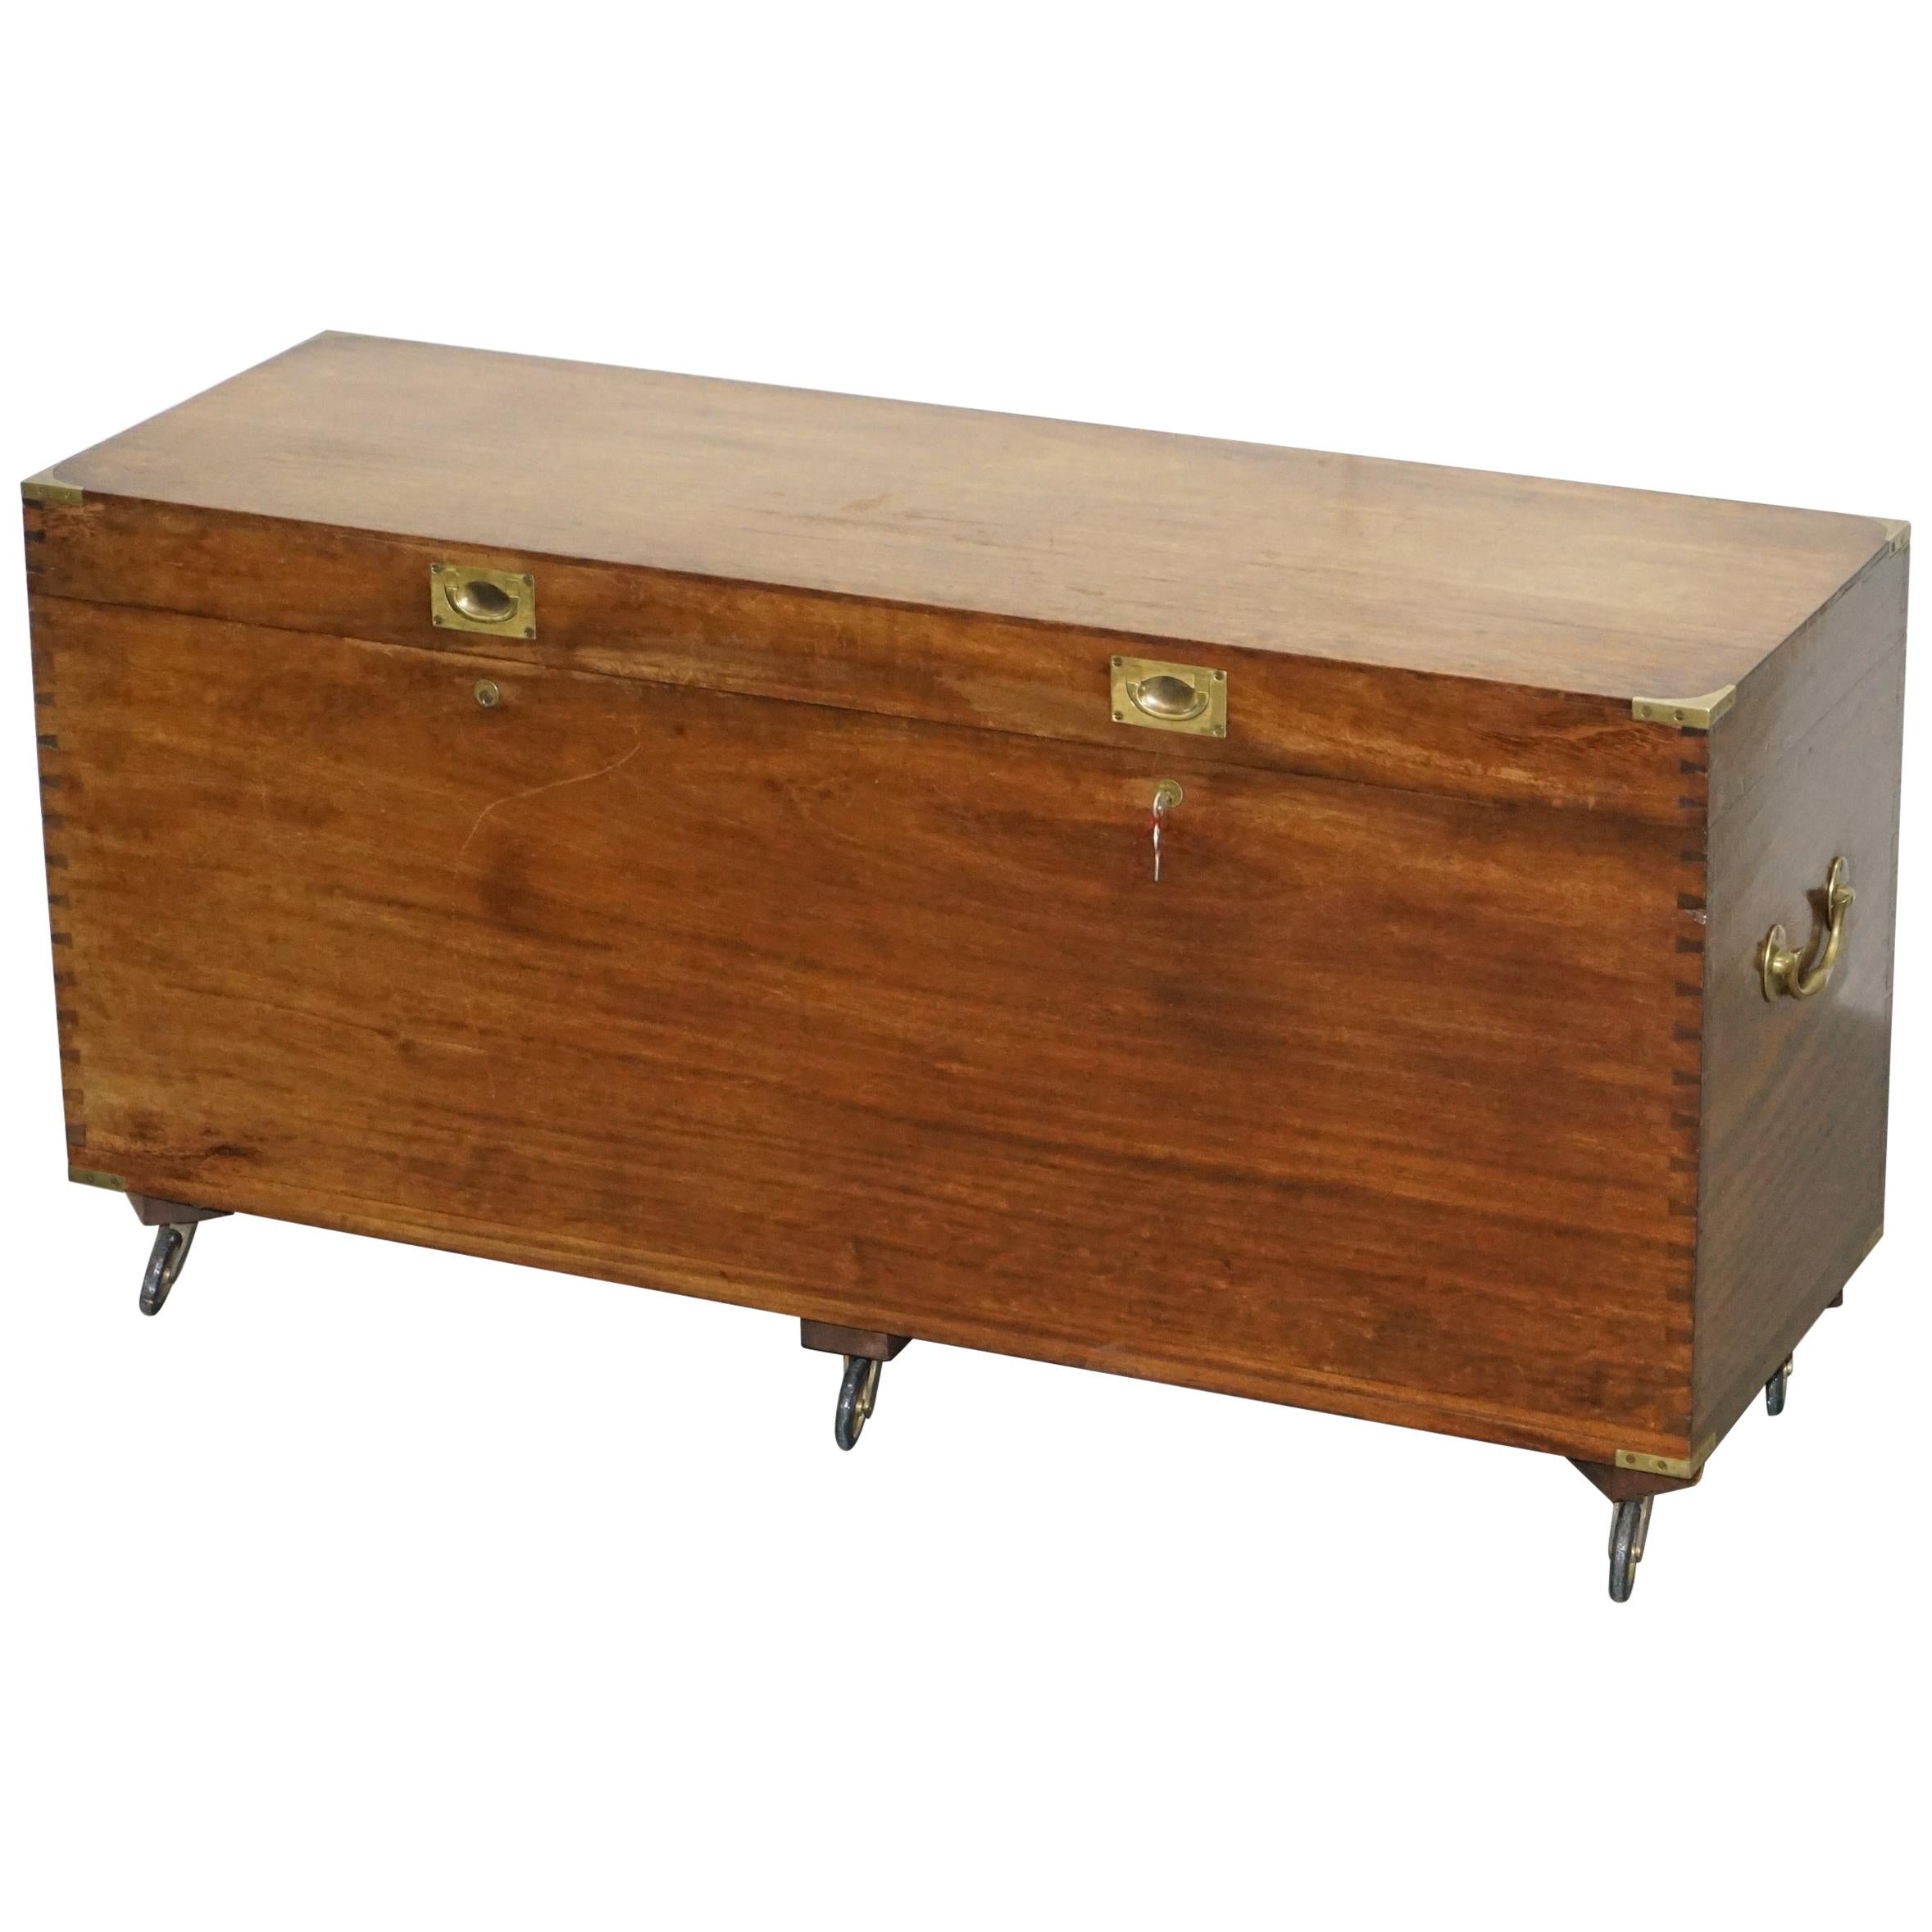 Rare Large circa 1900 Military Campaign Chest Trunk Zinc Lined for Champagne Etc For Sale